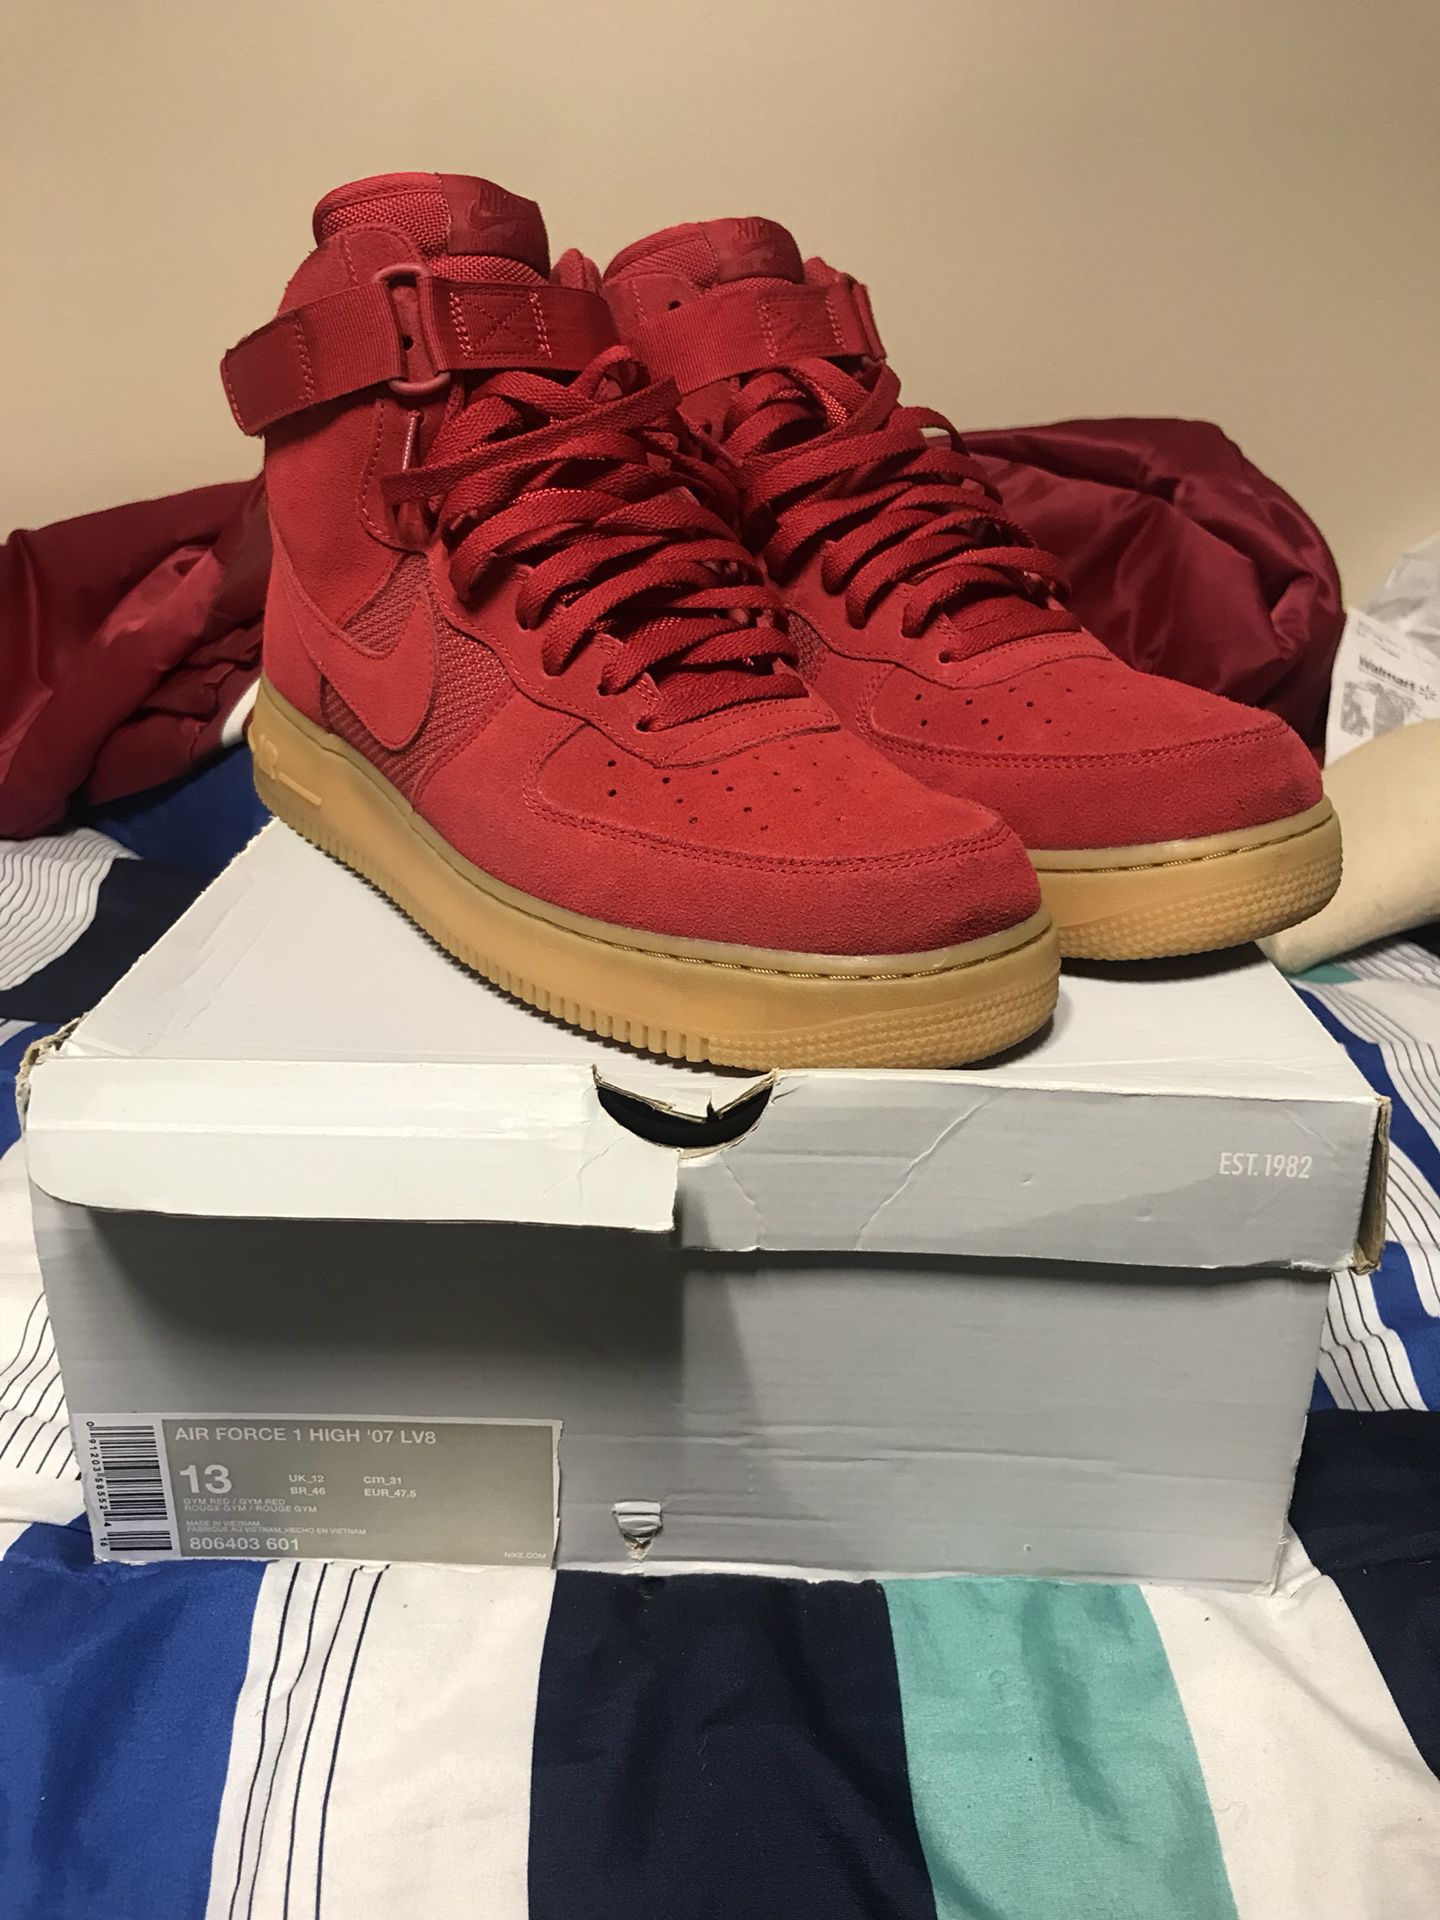 Nike Air Force 1 (AF1) Red Suede Gum for Sale in Durham, - OfferUp